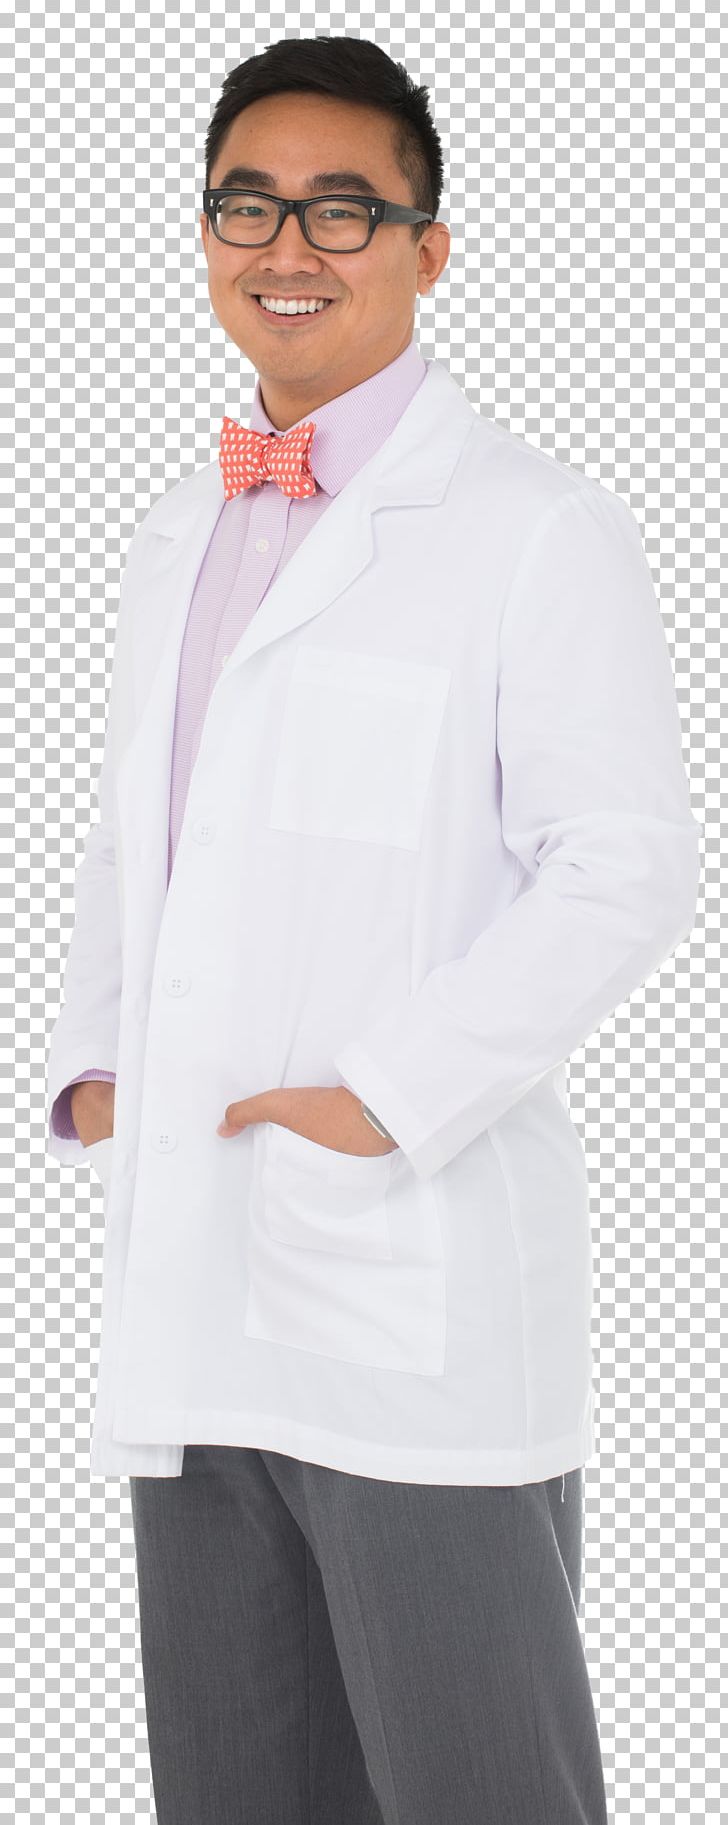 Dress Shirt T-shirt Blouse Lab Coats Collar PNG, Clipart, Arm, Career, Clothing, Dental, Doctor Free PNG Download